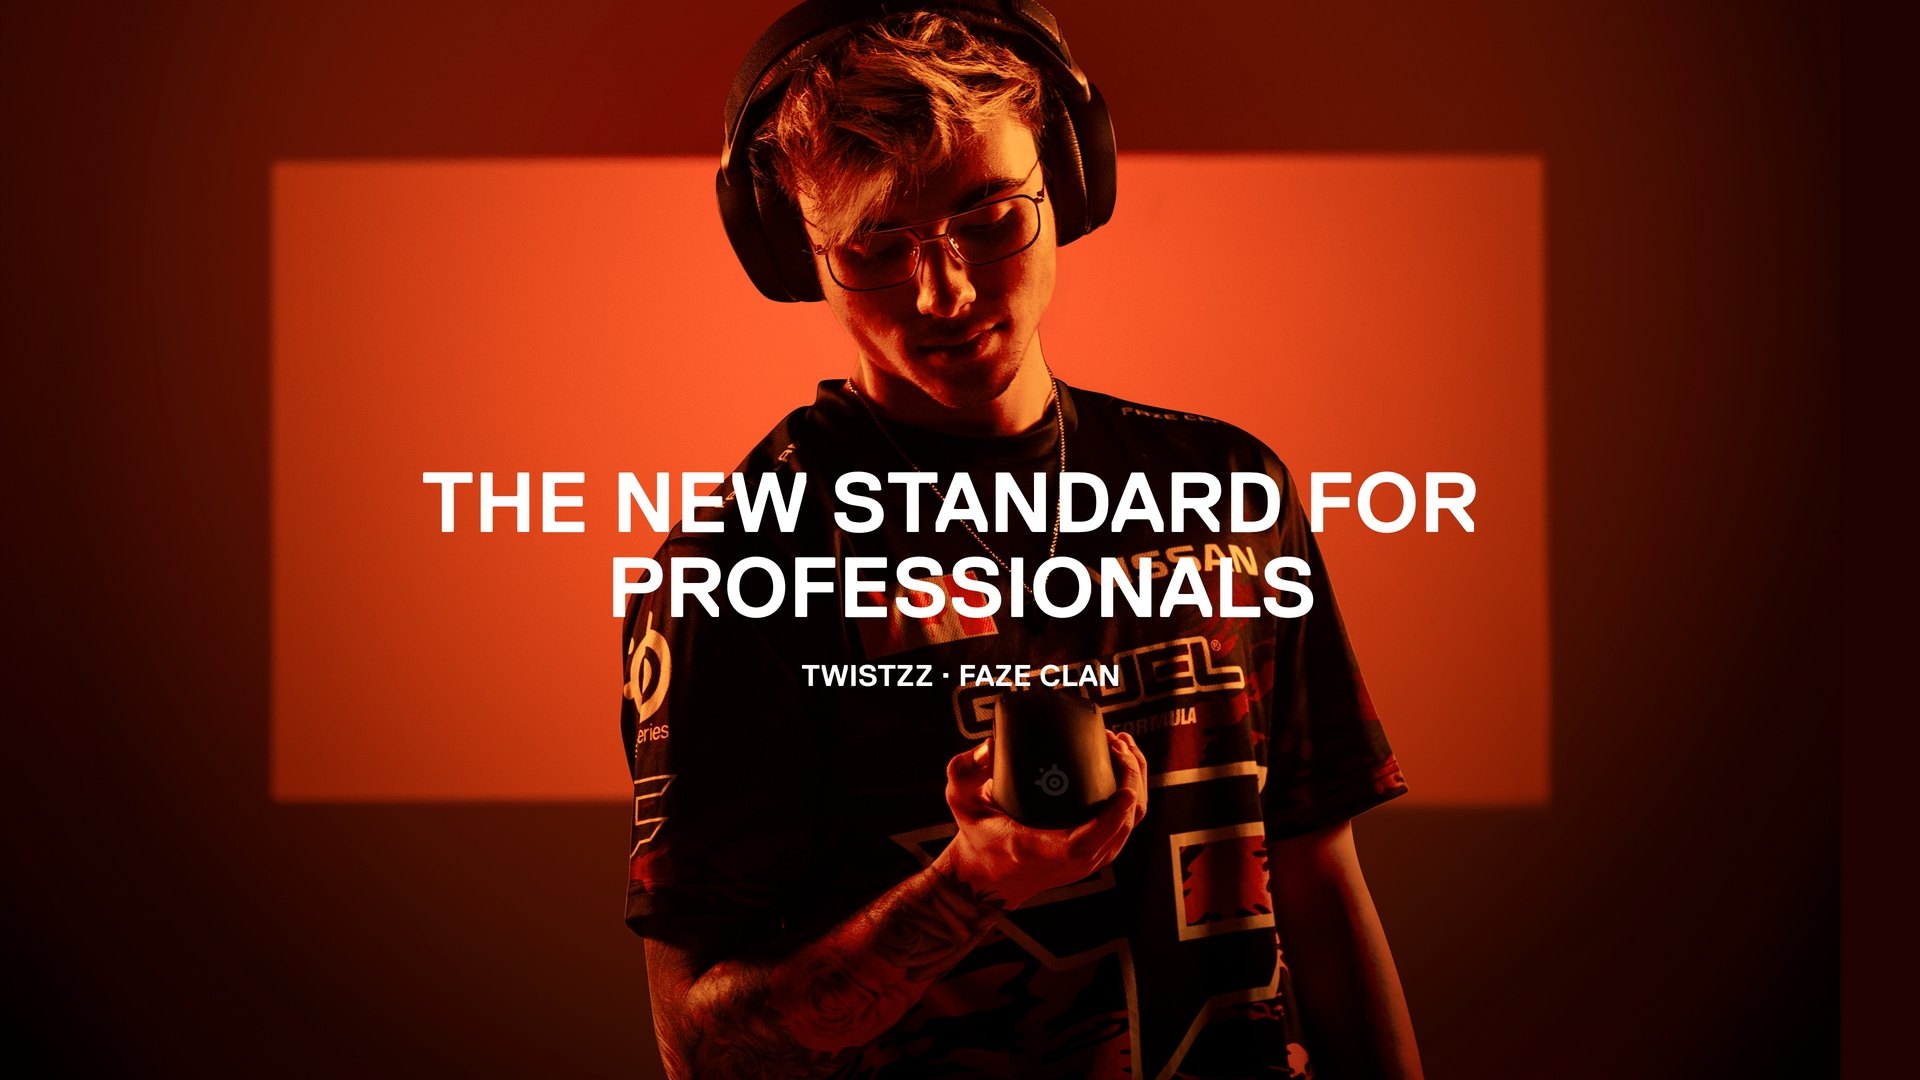 FaZe player Twistzz holds a Prime mouse. Text reads "The new standard for professionals."